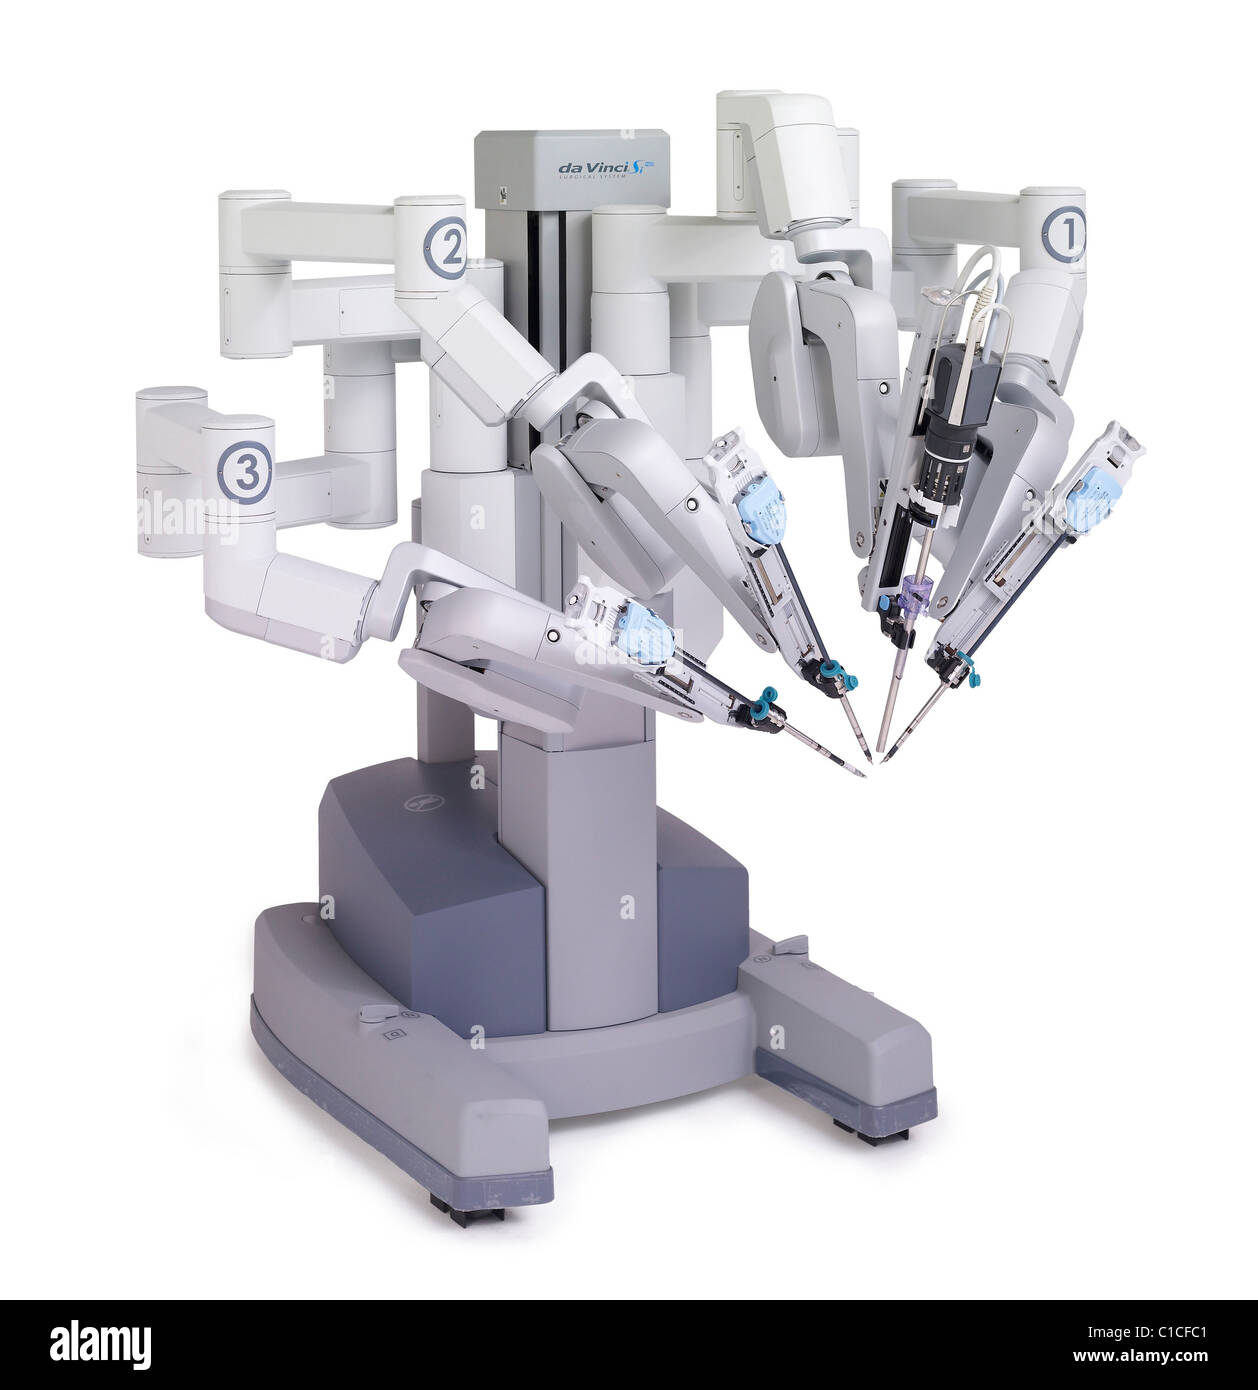 DR. ROBOT Fancy having a robot as your surgeon? It's suddenly a freaky, sci- fi possibility. The da Vinci Si robotic endoscopic Stock Photo - Alamy